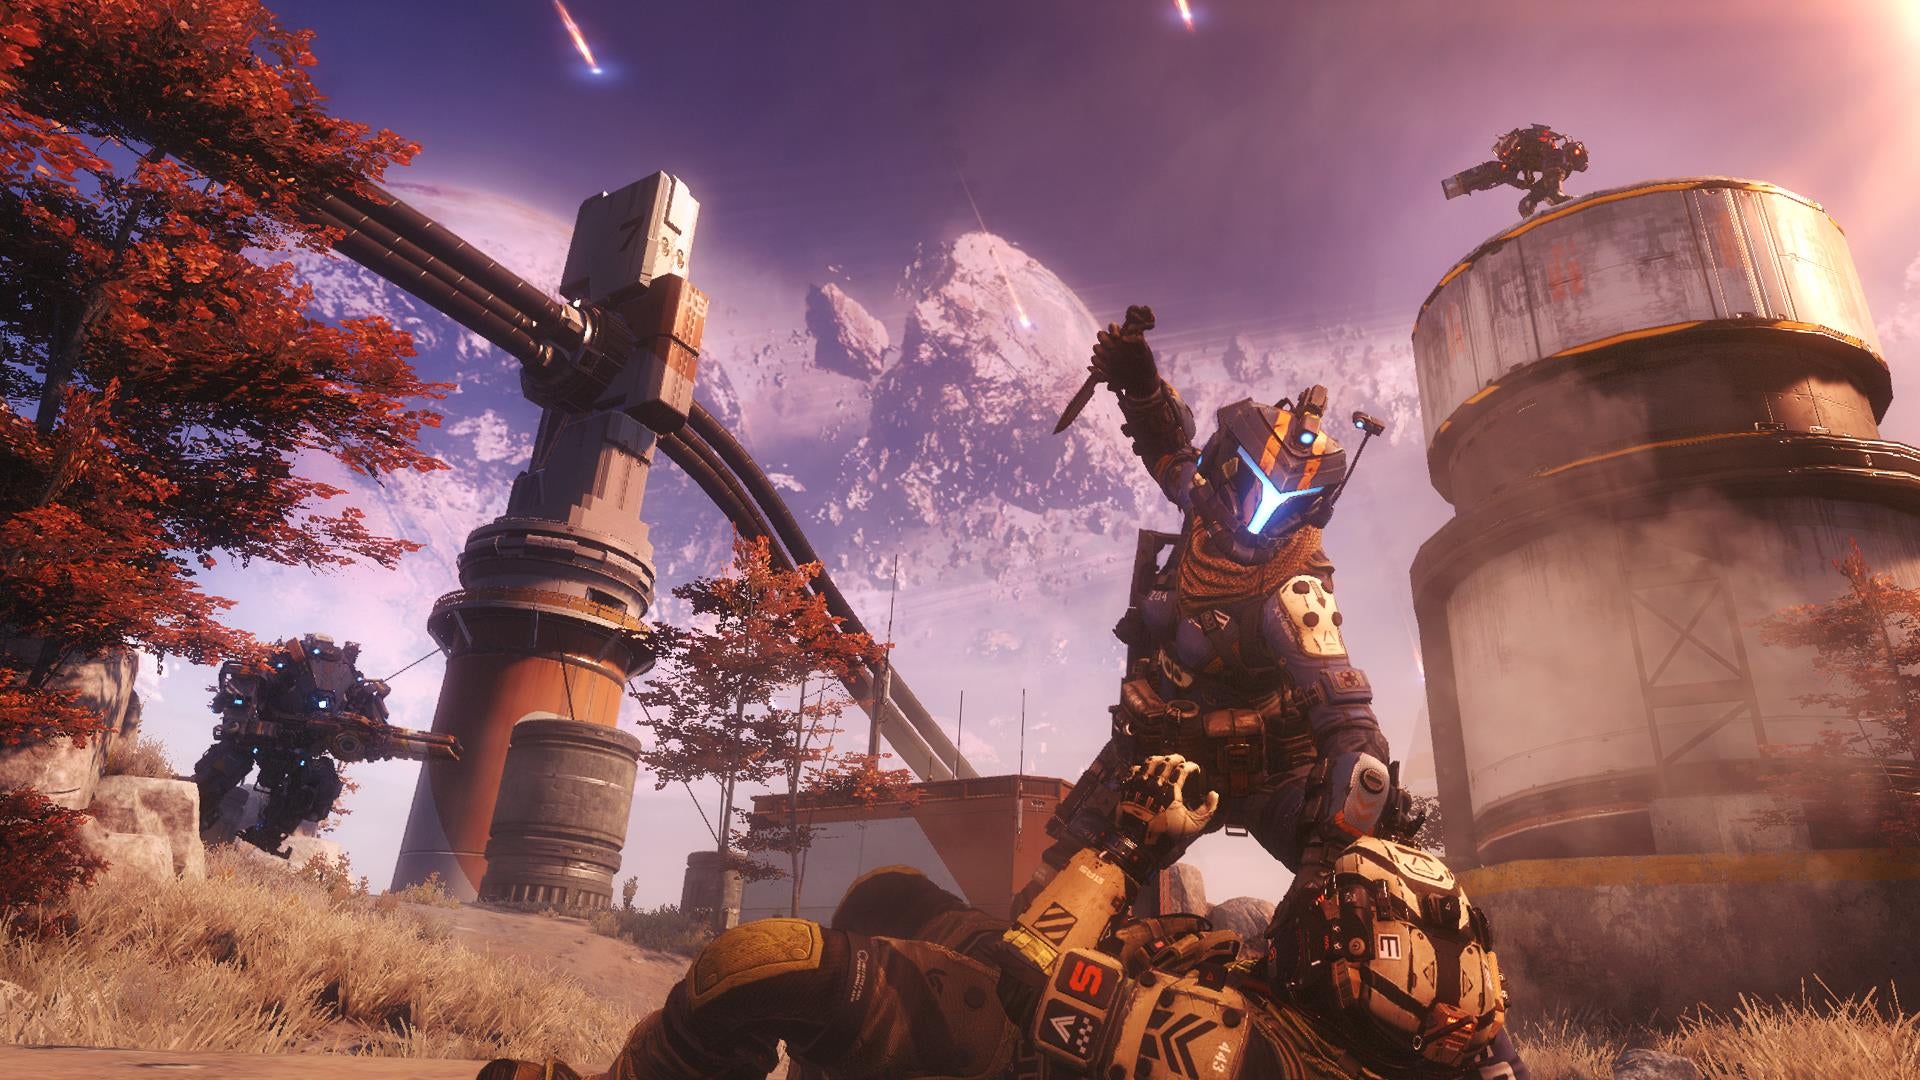 Titanfall 2 is not 4K on PS4 Pro, but graphics and a more stable frame-rate | VG247